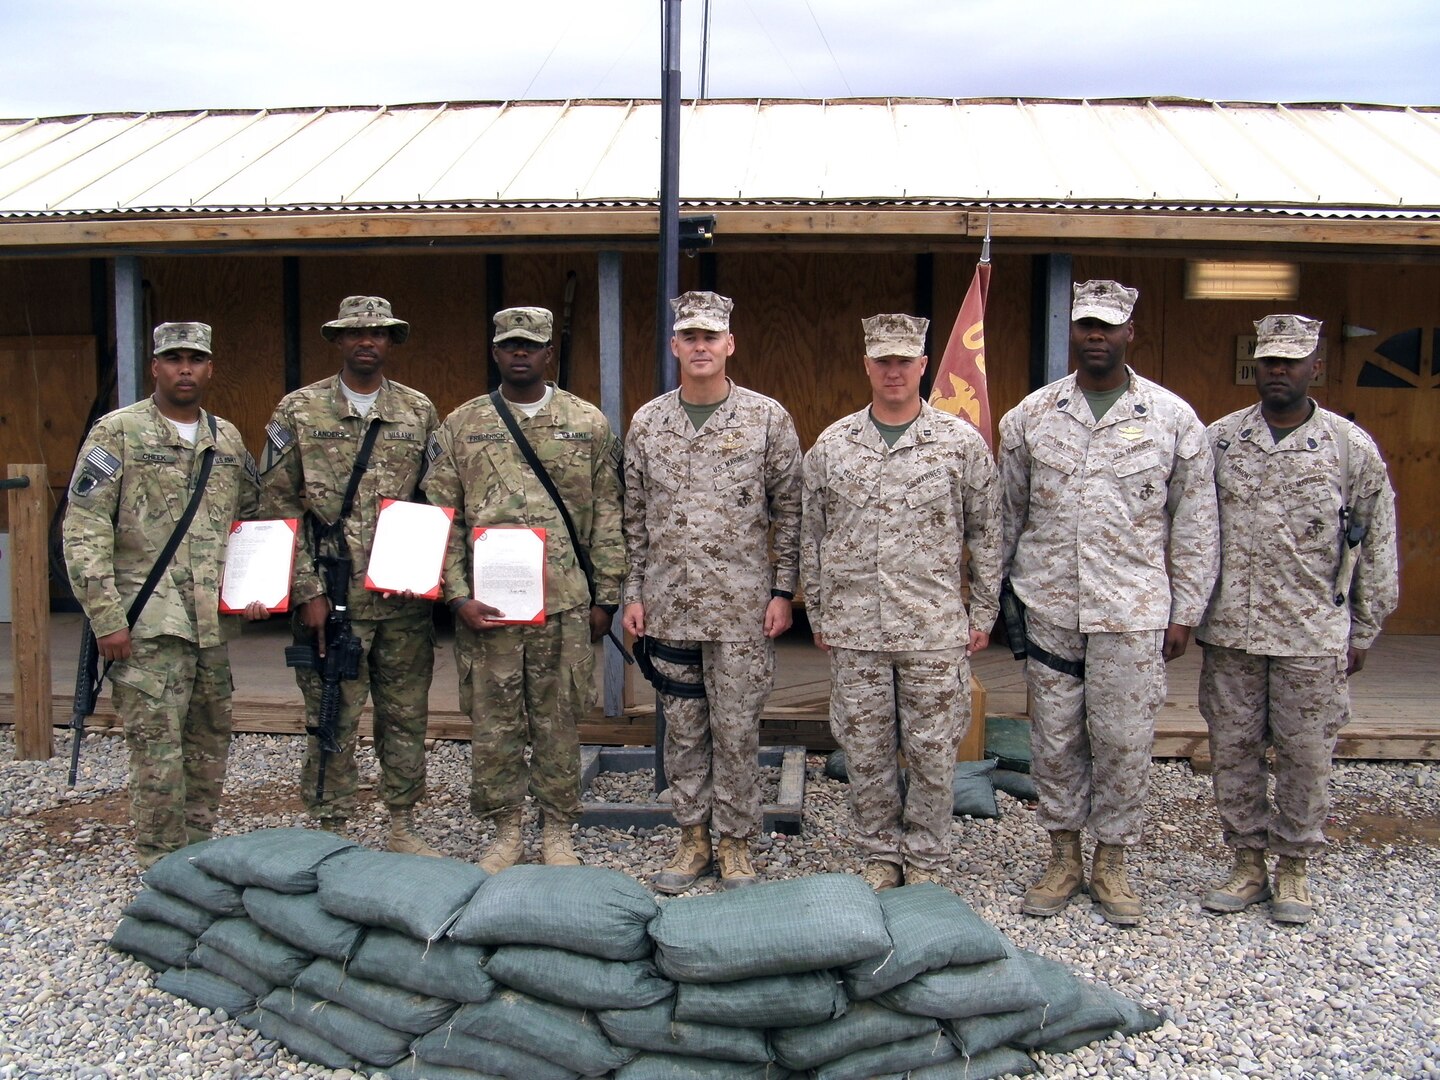 Soldiers of the 113th Sustainment Brigade are presented certificates of appreciation from Marine Col. Christopher Michelsen, commander of Marine Corps Logistics Command (Forward), Camp Dwyer, Afghanistan March 13, 2012. From left, Army Sgt. 1st Class Kendall Cheek, Staff Sgt. Dirkson Sanders, and Spc. Raymond Frederick, developed a training plan and presented a driver training course to Marines and civilians on Camp Dwyer.